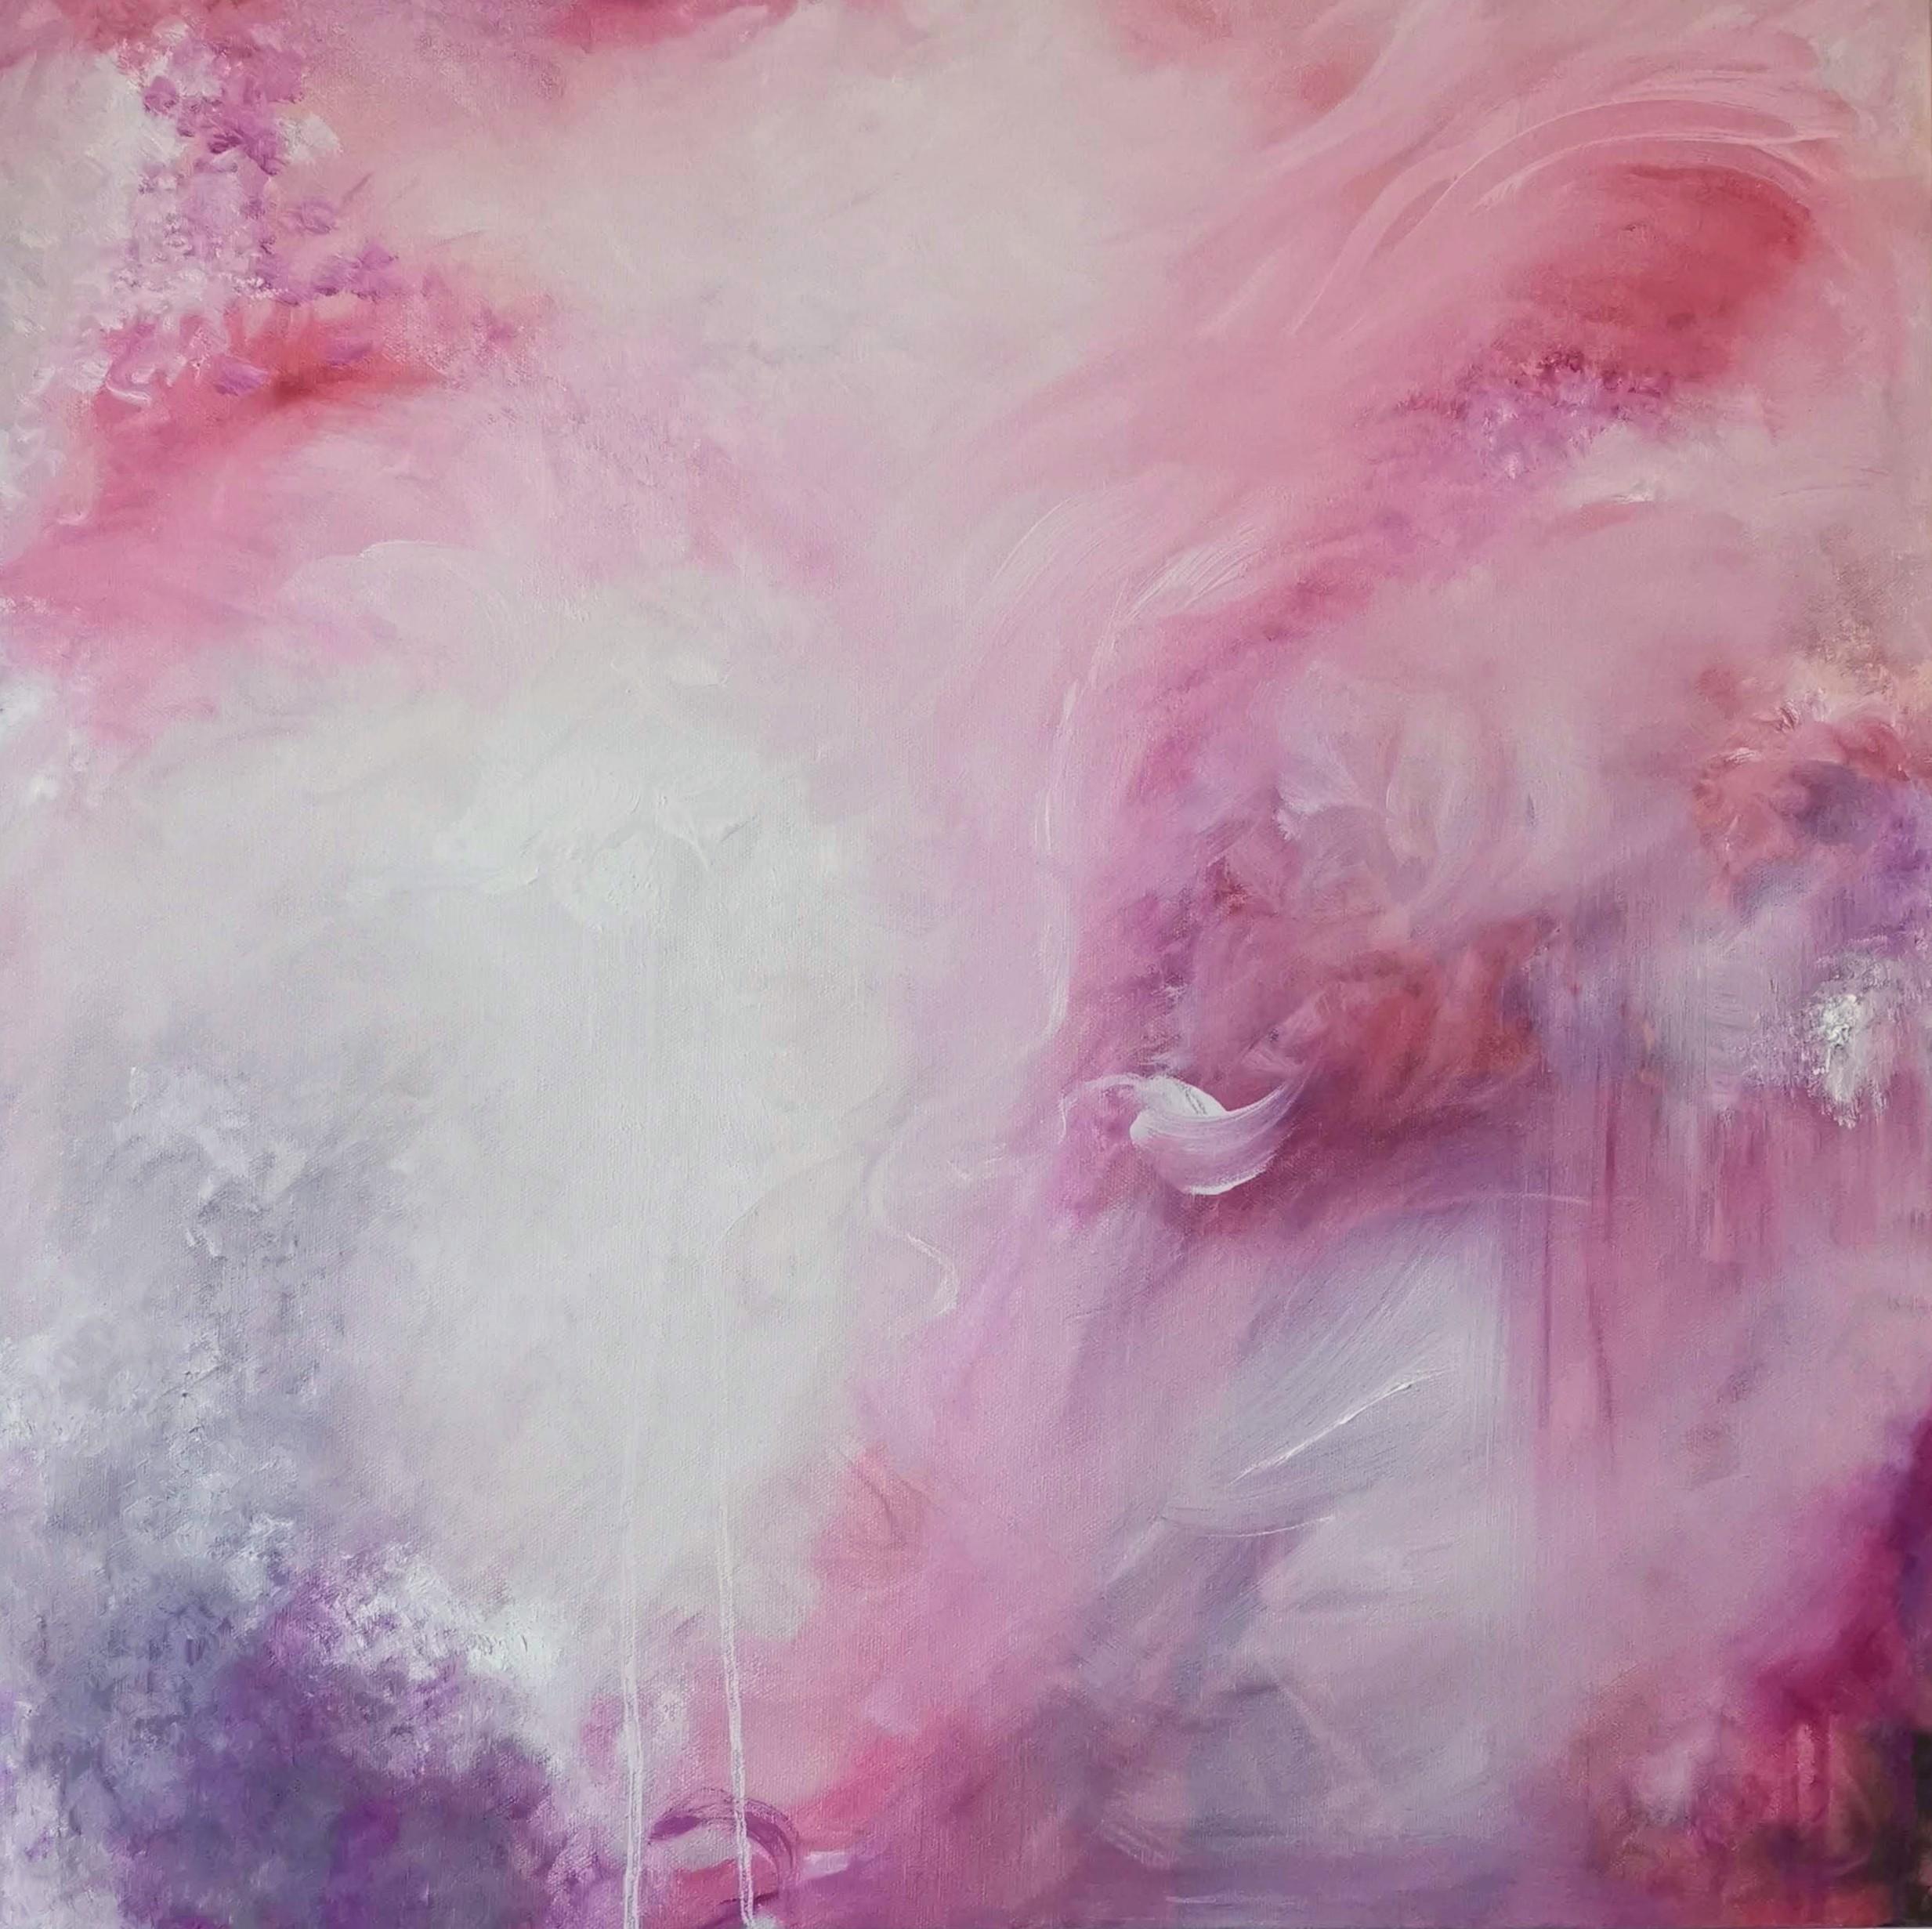 Jennifer L. Baker Abstract Painting - Love child - Soft pink abstract expressionist nature painting